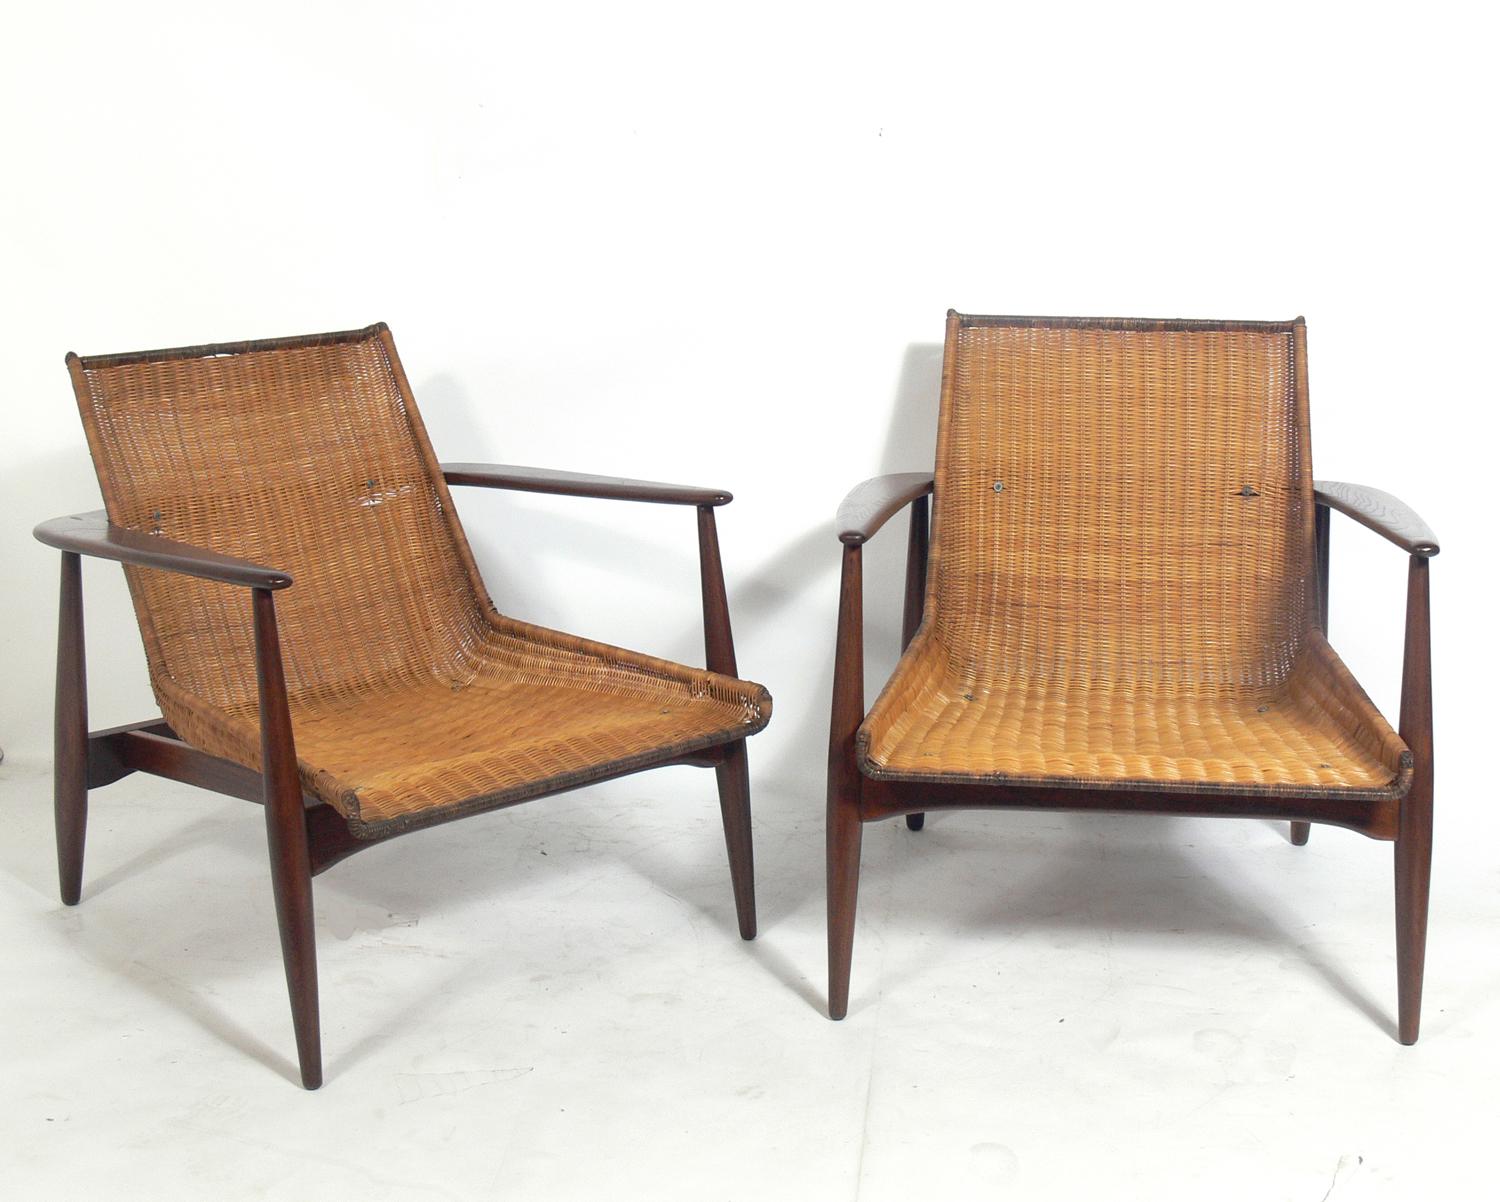 American Pair of Lawrence Peabody Walnut and Rattan Lounge Chairs